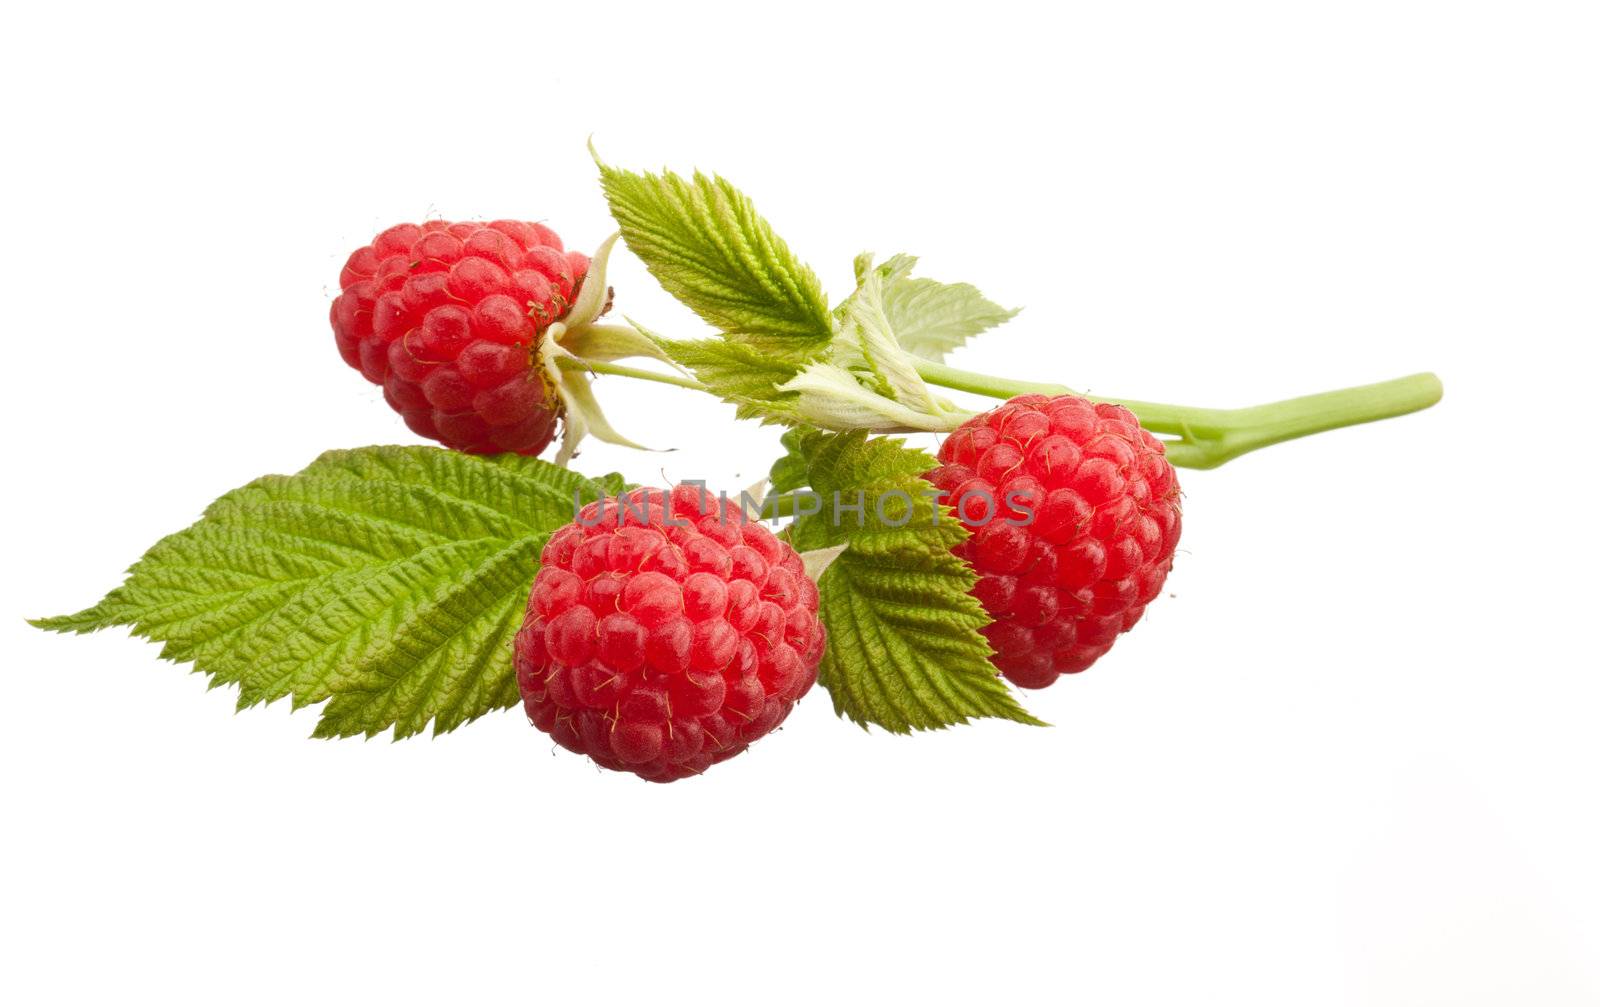 red raspberry by agg